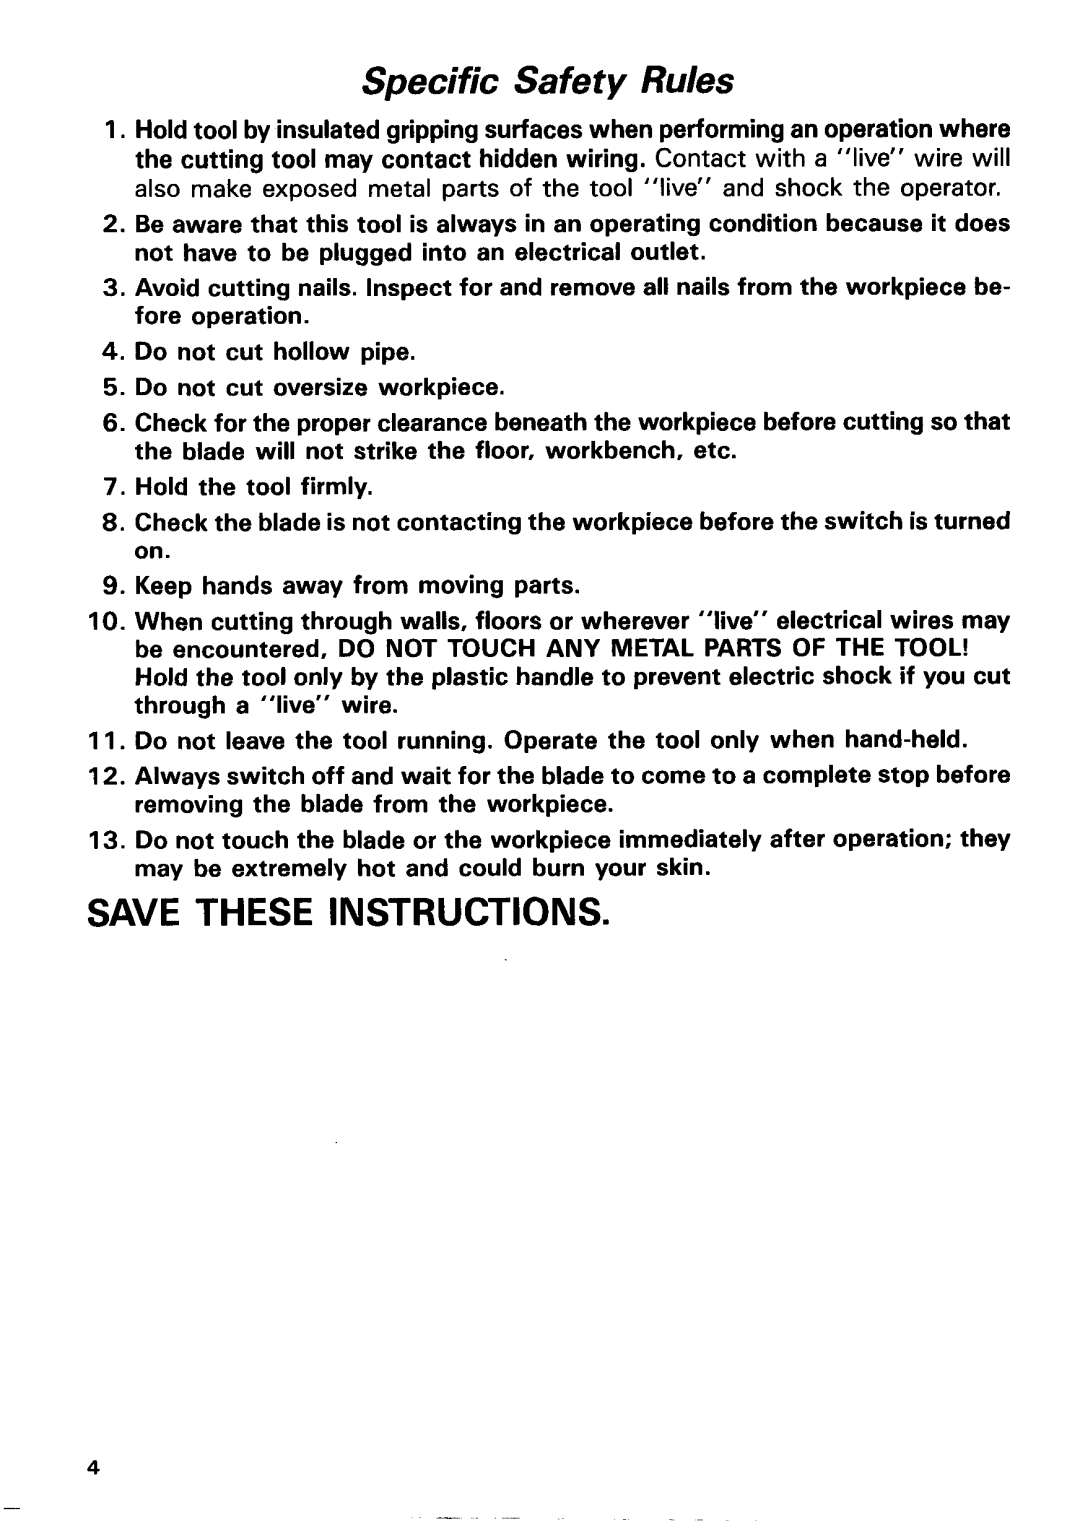 Makita 433ODWA instruction manual Save These Instructions, Specific Safety Rules 